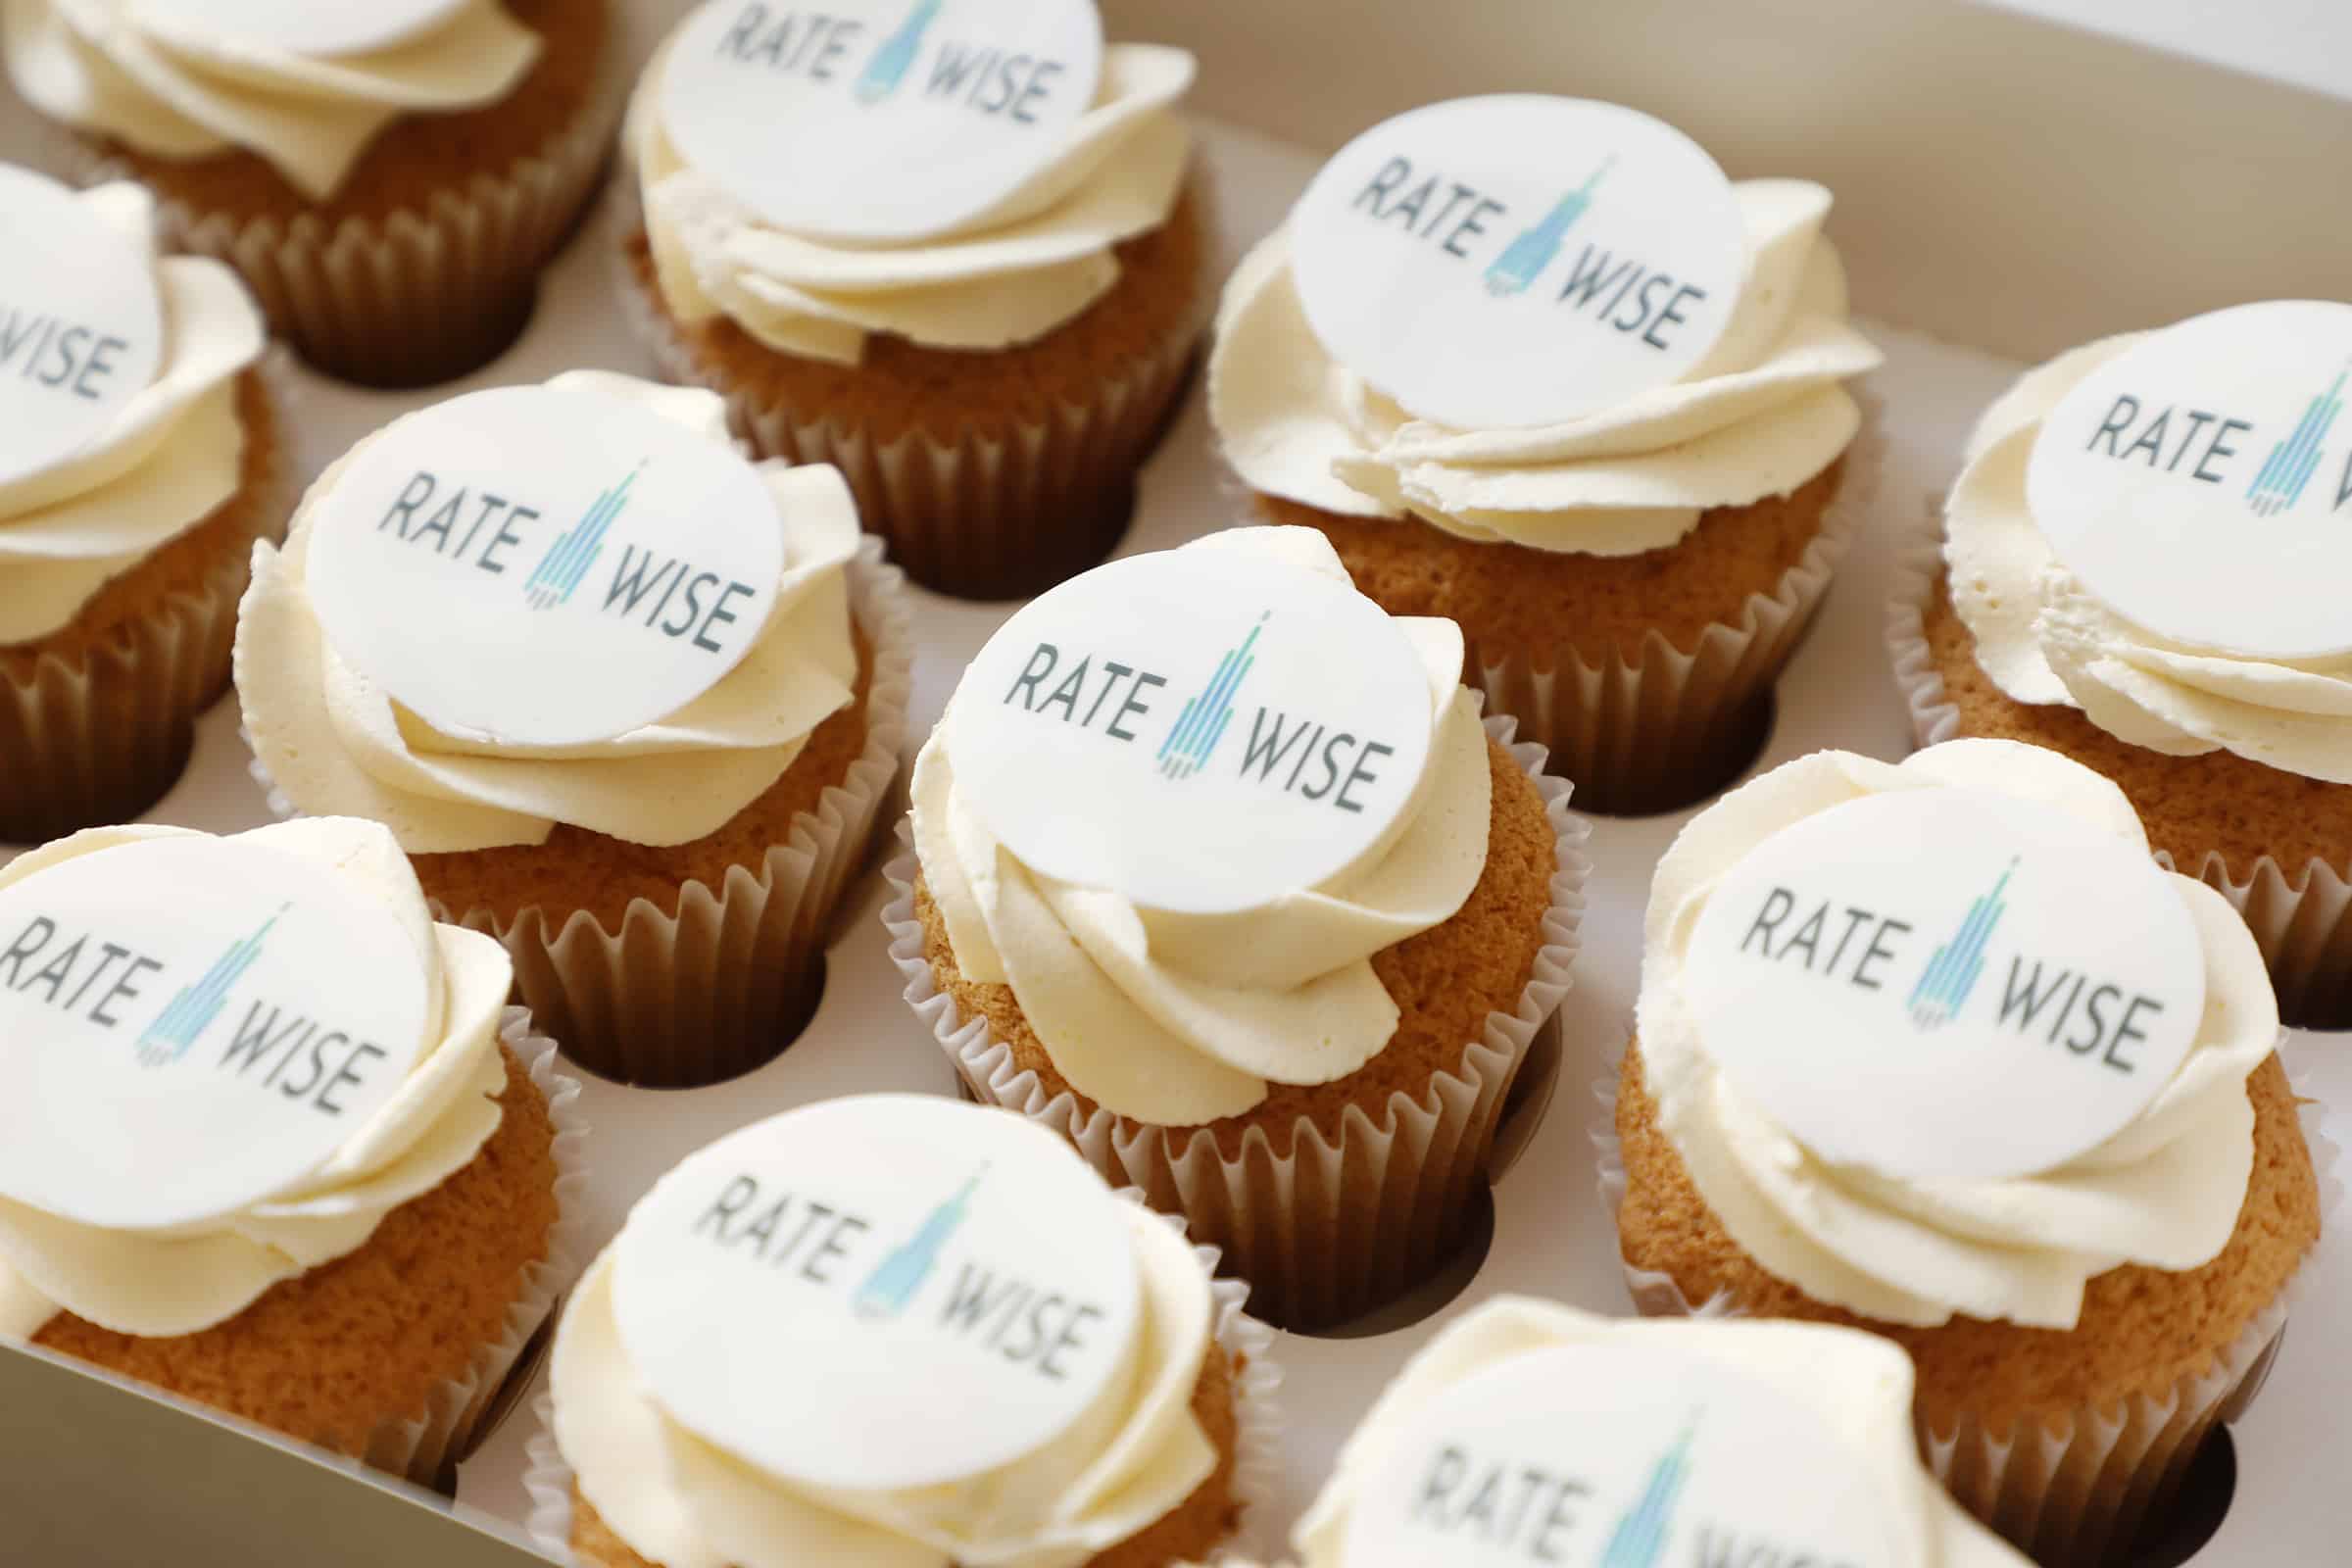 Rate Wise Celebrates First Birthday | Rate Wise